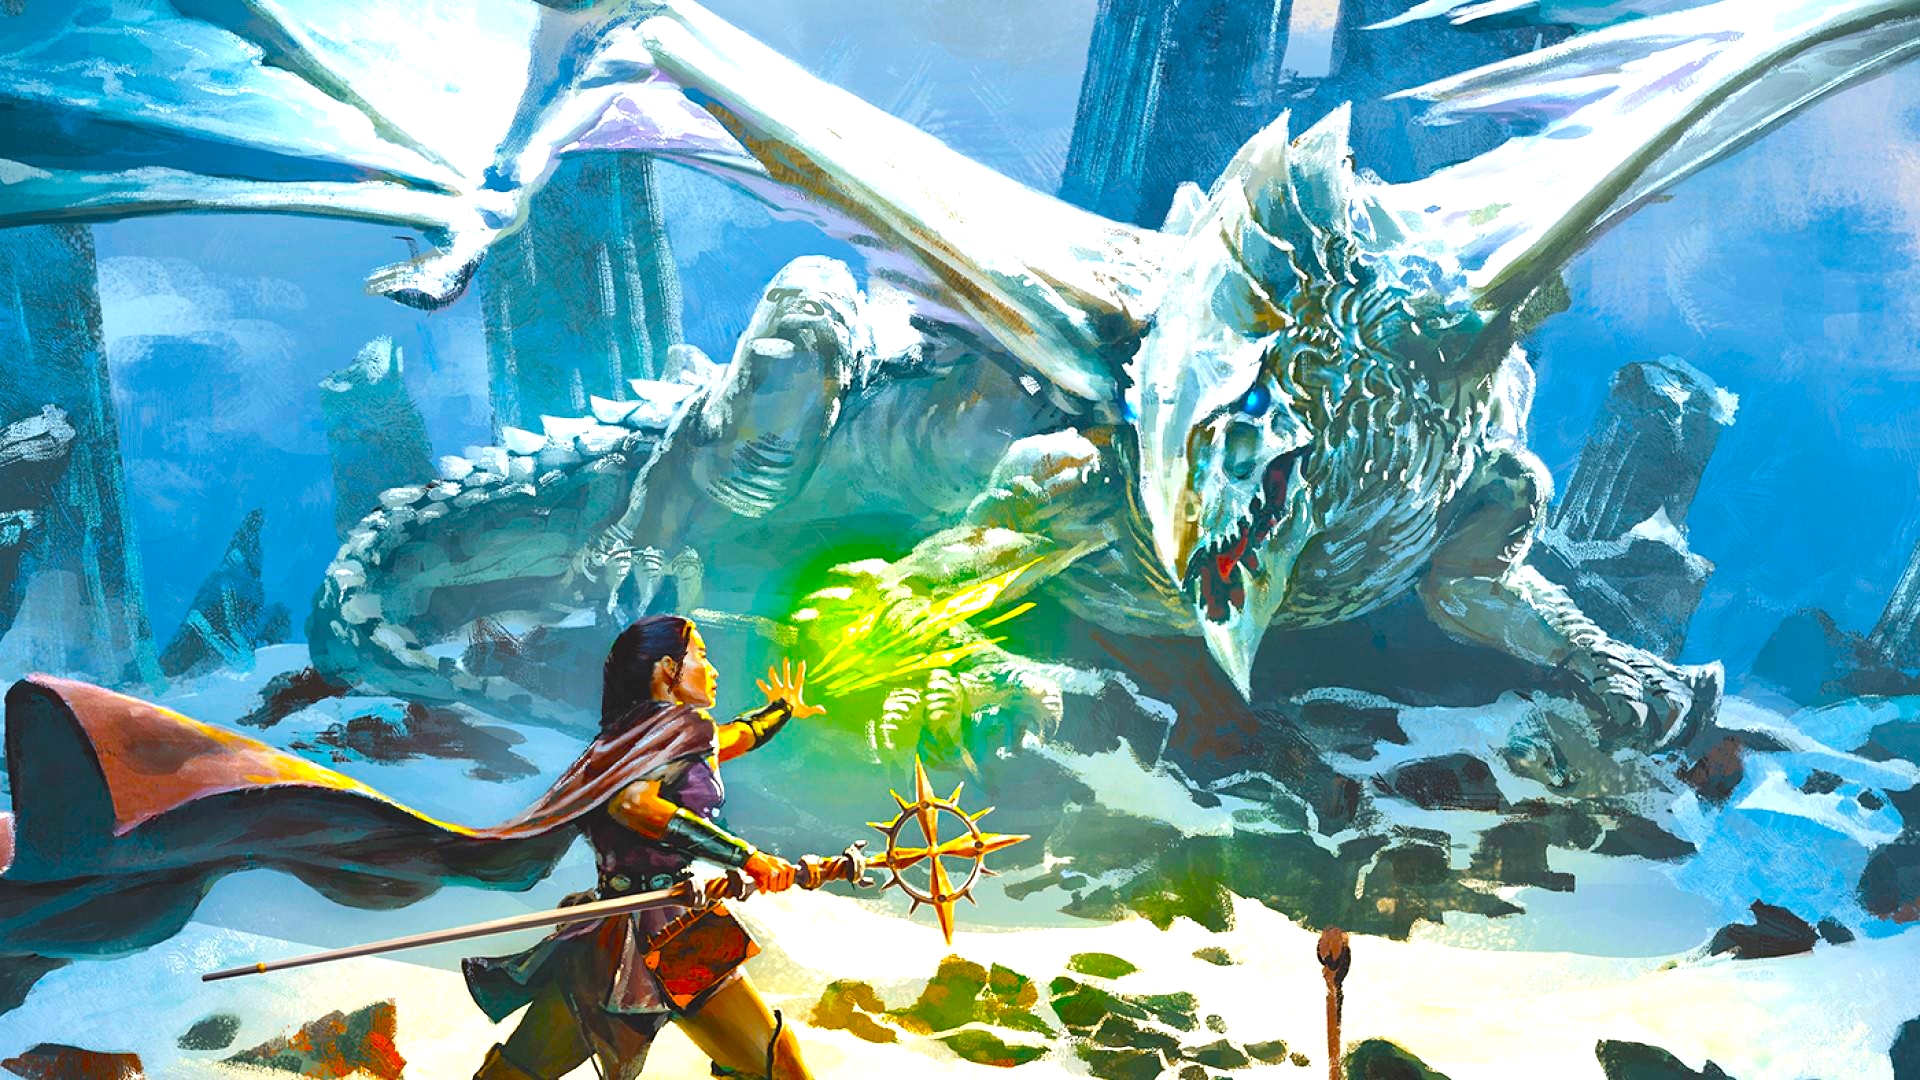 DnD encounter generator 5e - magic user fights white dragon (art by Wizards of the Coast)